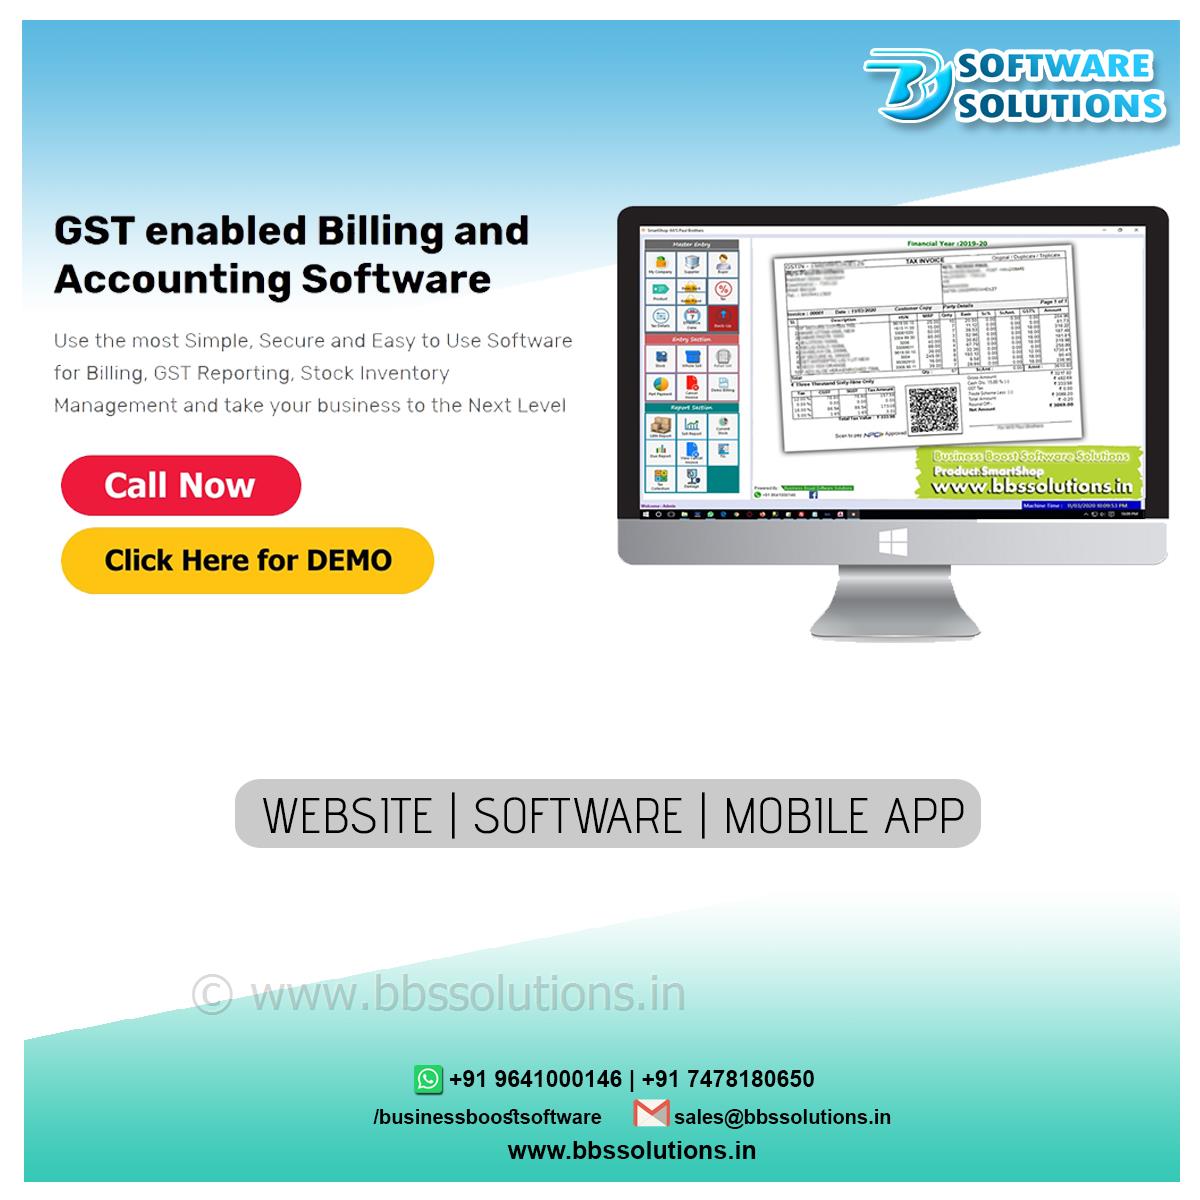 GST ENABLE software for distributor,wholesale,retail...  Business Boost Software Solutions do Best Software ,Web Development,Mobile App solutions provider in siliguri , india, WestBengal , Assam , Siliguri , Jalpaiguri ,Dhupguri,
    Best website designing in Siliguri with affordable packages and quick support. Get effective website design in Siliguri from best website designers. #bbssolutions , #SEO  , #DigitalMarketing  , #WebDesign  , #SoftwareDevelopment  , #FacebookAds  , #GoogleAds  , #GoogleSEO  , #WebsiteDesigning 
     , #Software  , #website  , #BusinessBoostSoftwareSolutions  , bbssolutions,SEO, Digital Marketing, WebDesign, Software Development, Facebook Ads, Google Ads, Google SEO, Website Designing, 
    Software, website, Business Boost Software Solutions, 9641000146,7478180650,best GST software in West bengal,Best GST software company in north bengal,GST solution in west bengal
    ,gst solutions in north bengal,best customize software in siliguri , india,best customize software in west bengal,best customize software in dhupguri,news portal website in west bengal
    ,news portal website in siliguri , india,regional news portal website in siliguri , india,school software in west bengal,school software in north bengal,school website in north bengal,
    school software in north bengal,android app, ios app, ecommerce website, ecommerce software,Web designing, website designing, ecommerce website, how to make website, create website, 
    website development company, web page design, seo, search engine optimization, seo siliguri , india , 
    seo company, best seo company, seo services, responsive web design, web designing companies, 
    how to create a website, internet marketing, digital marketing, online marketing, social media marketing, 
    promotion,web designing in Siliguri,web designing in Siliguri siliguri , india,web designing in siliguri , india,GST Software  ,  GST Billing Software  ,  GST Accounting  ,  GST Ready Software,
    software company in siliguri,software company in siliguri siliguri , india,software company in north east siliguri , india,
    school software in siliguri,school software in north east siliguri , india,customize software,free software demo,
    reasonable price software,cost effective software,resonable price software,free demo software,free software,best software support,free software support,best software company in siliguri , india,
    best software company in siliguri,MLM Software company in Siliguri,Binary Software company in Siliguri,
    top ten software company in north bengal,top ten software company in siliguri,top ten software company in siliguri , india,
    top ten software company in north east,software development siliguri , india,west bengal,kolkata,siliguri , software company in siliguri , india
     , software development west bengal , Customized software siliguri , india , software for hotel,medicine distributors,
    jewellery shop , best software company in siliguri,jalpaiguri,sikkim,darjeeling  , Business Boost Softwate Solutions  ,  
    Web designing company in siliguri  ,  ecommerce designing company in siliguri  ,  web development company in siliguri  ,  
    software development comapny in siliguri  ,  software development in sikkim  ,  website designing company in sikkim  ,  
    SEO service in sikkim  ,  web designing company in siliguri  ,  web designing compnay in North Bengal  ,  
    SEO service in siliguri  ,  web designing in north bengal  ,  web designing in north east siliguri , india , website designing in siliguri, best website designing in siliguri, web design, web designer in siliguri, web designing company siliguri